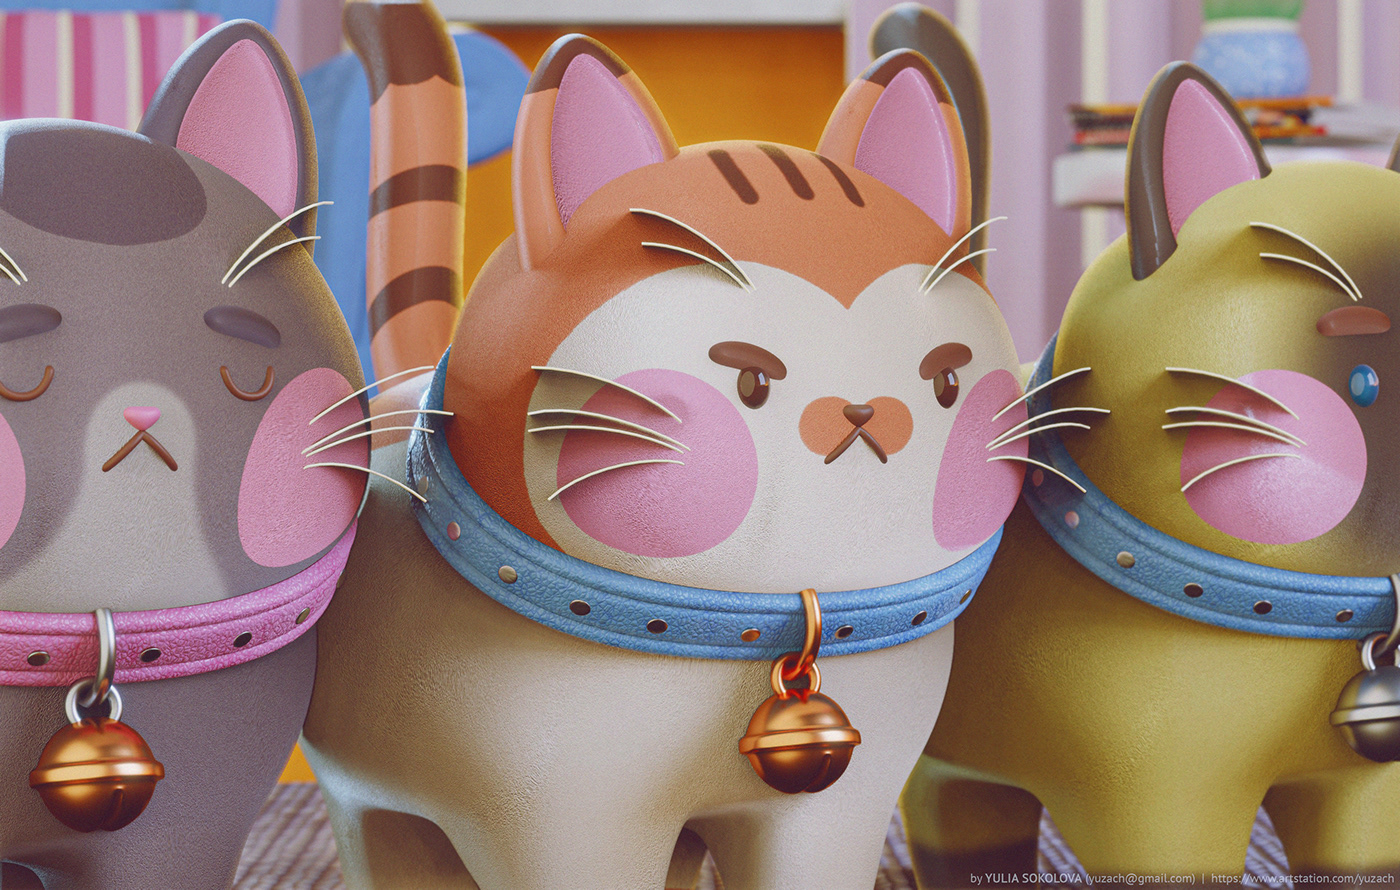 3D scene with cartoon characters: cats, plants and stylized furniture, rendered in Blender Eevee